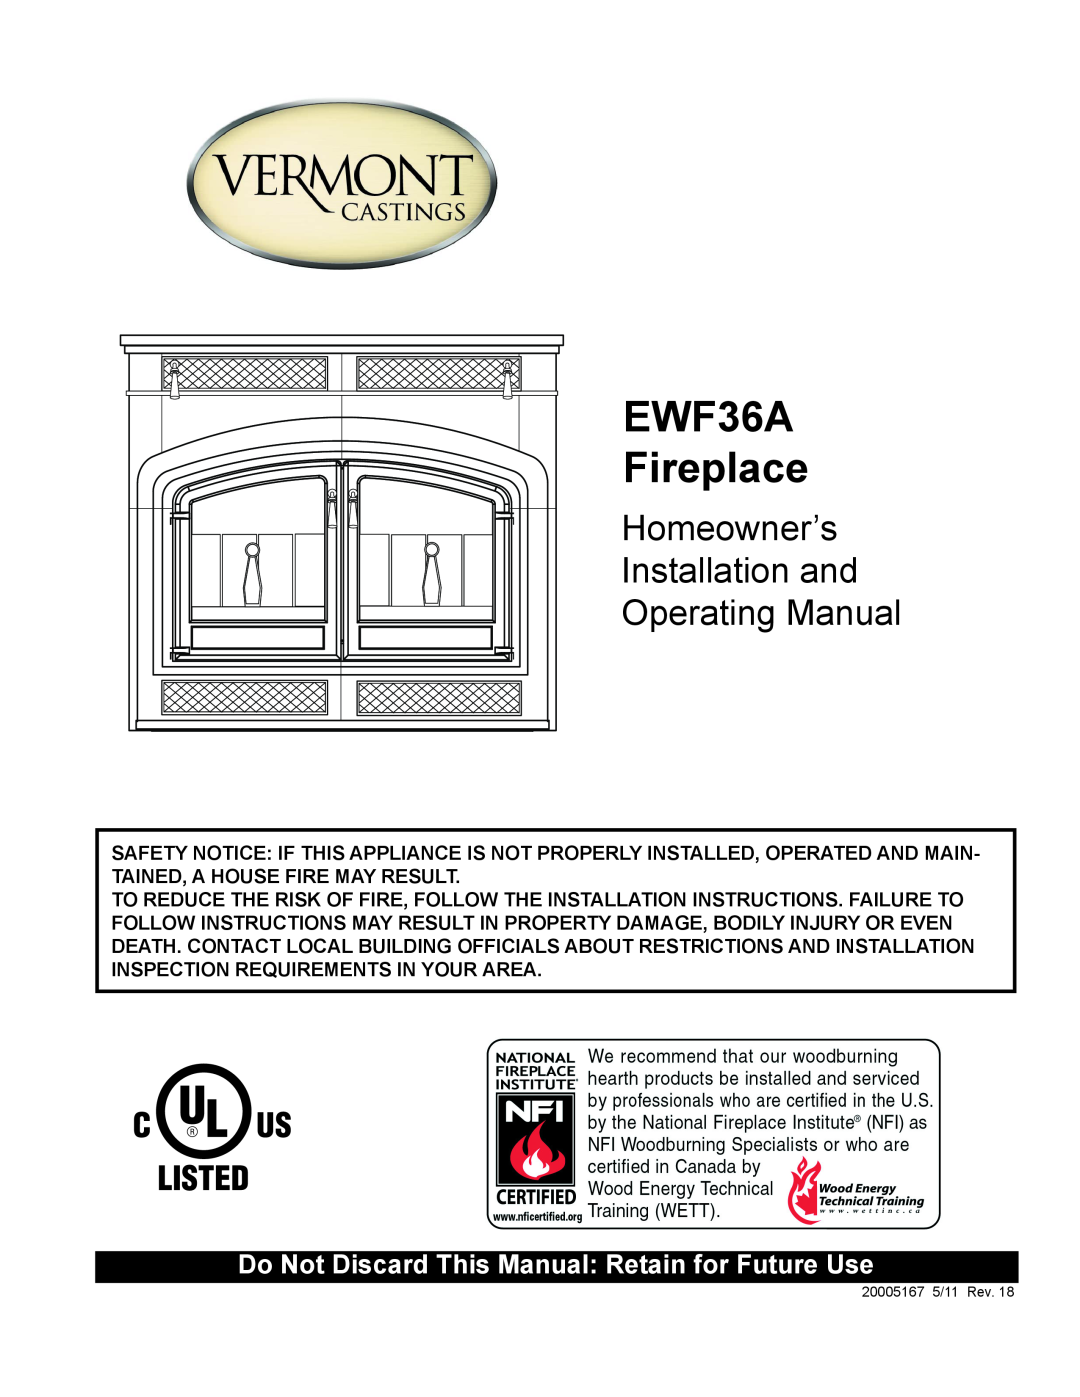 MHP manual EWF36A Fireplace, Homeowner’s Installation and Operating Manual 